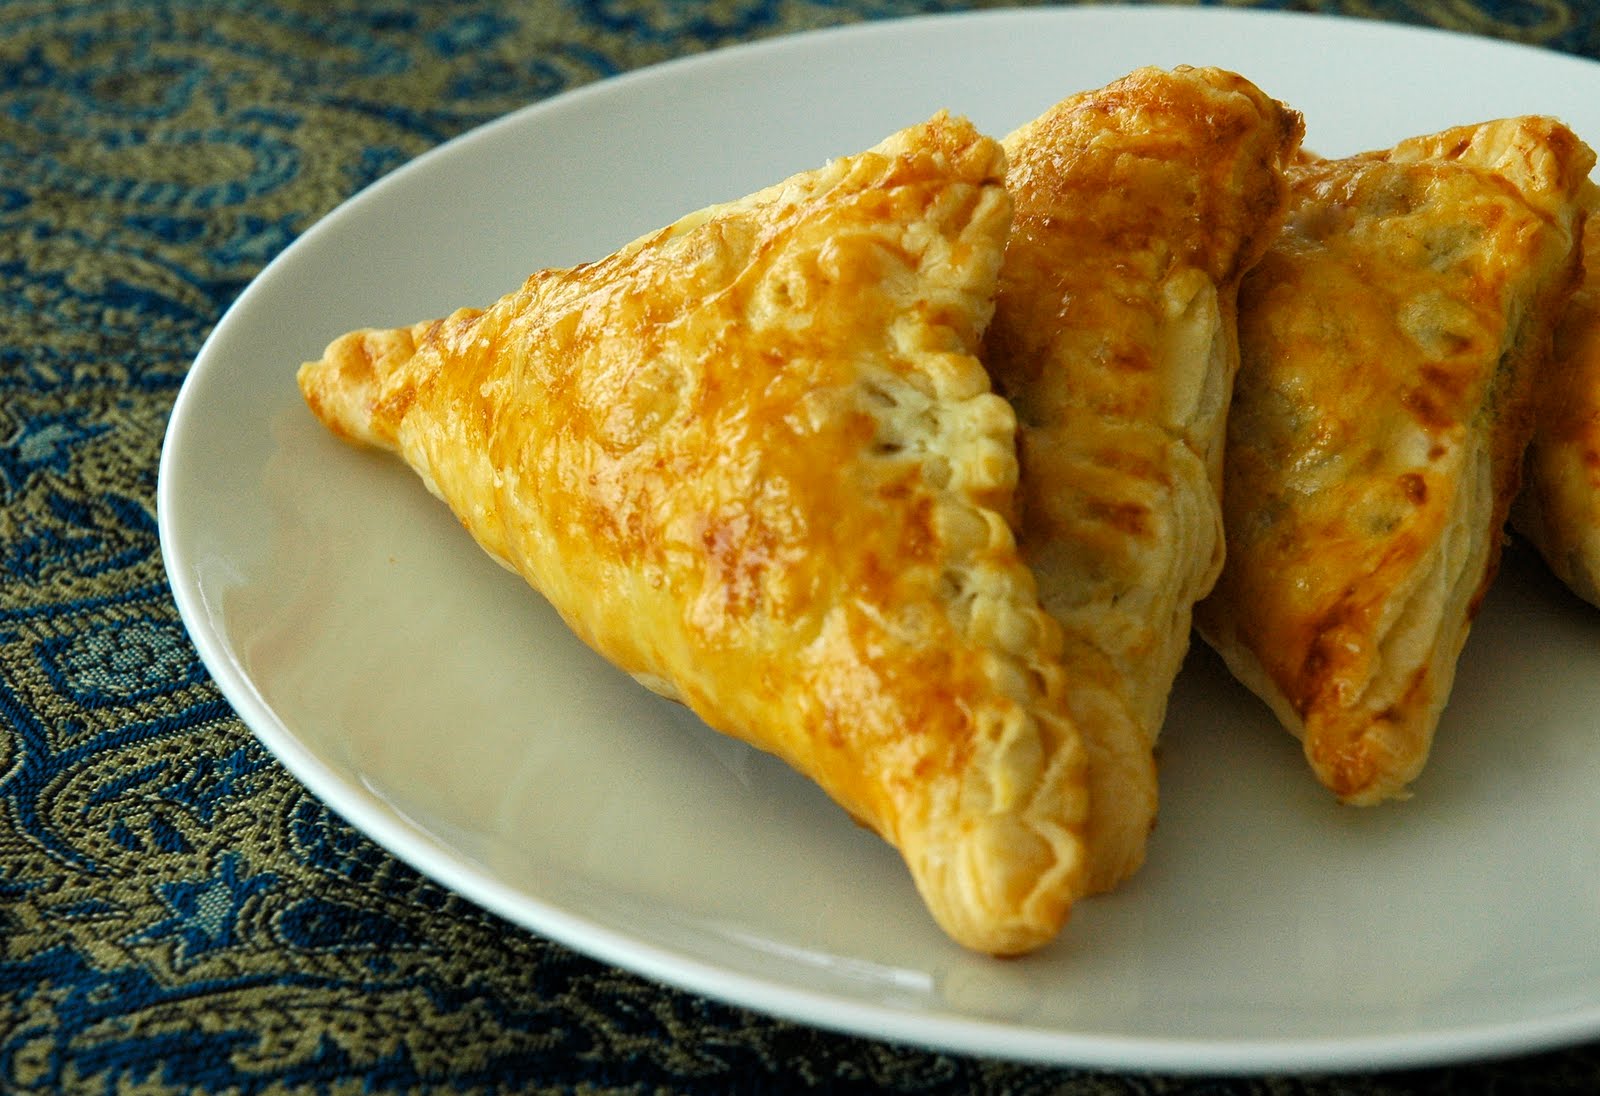 Olives & Bread: Vegetable Samosa with Puff Pastry